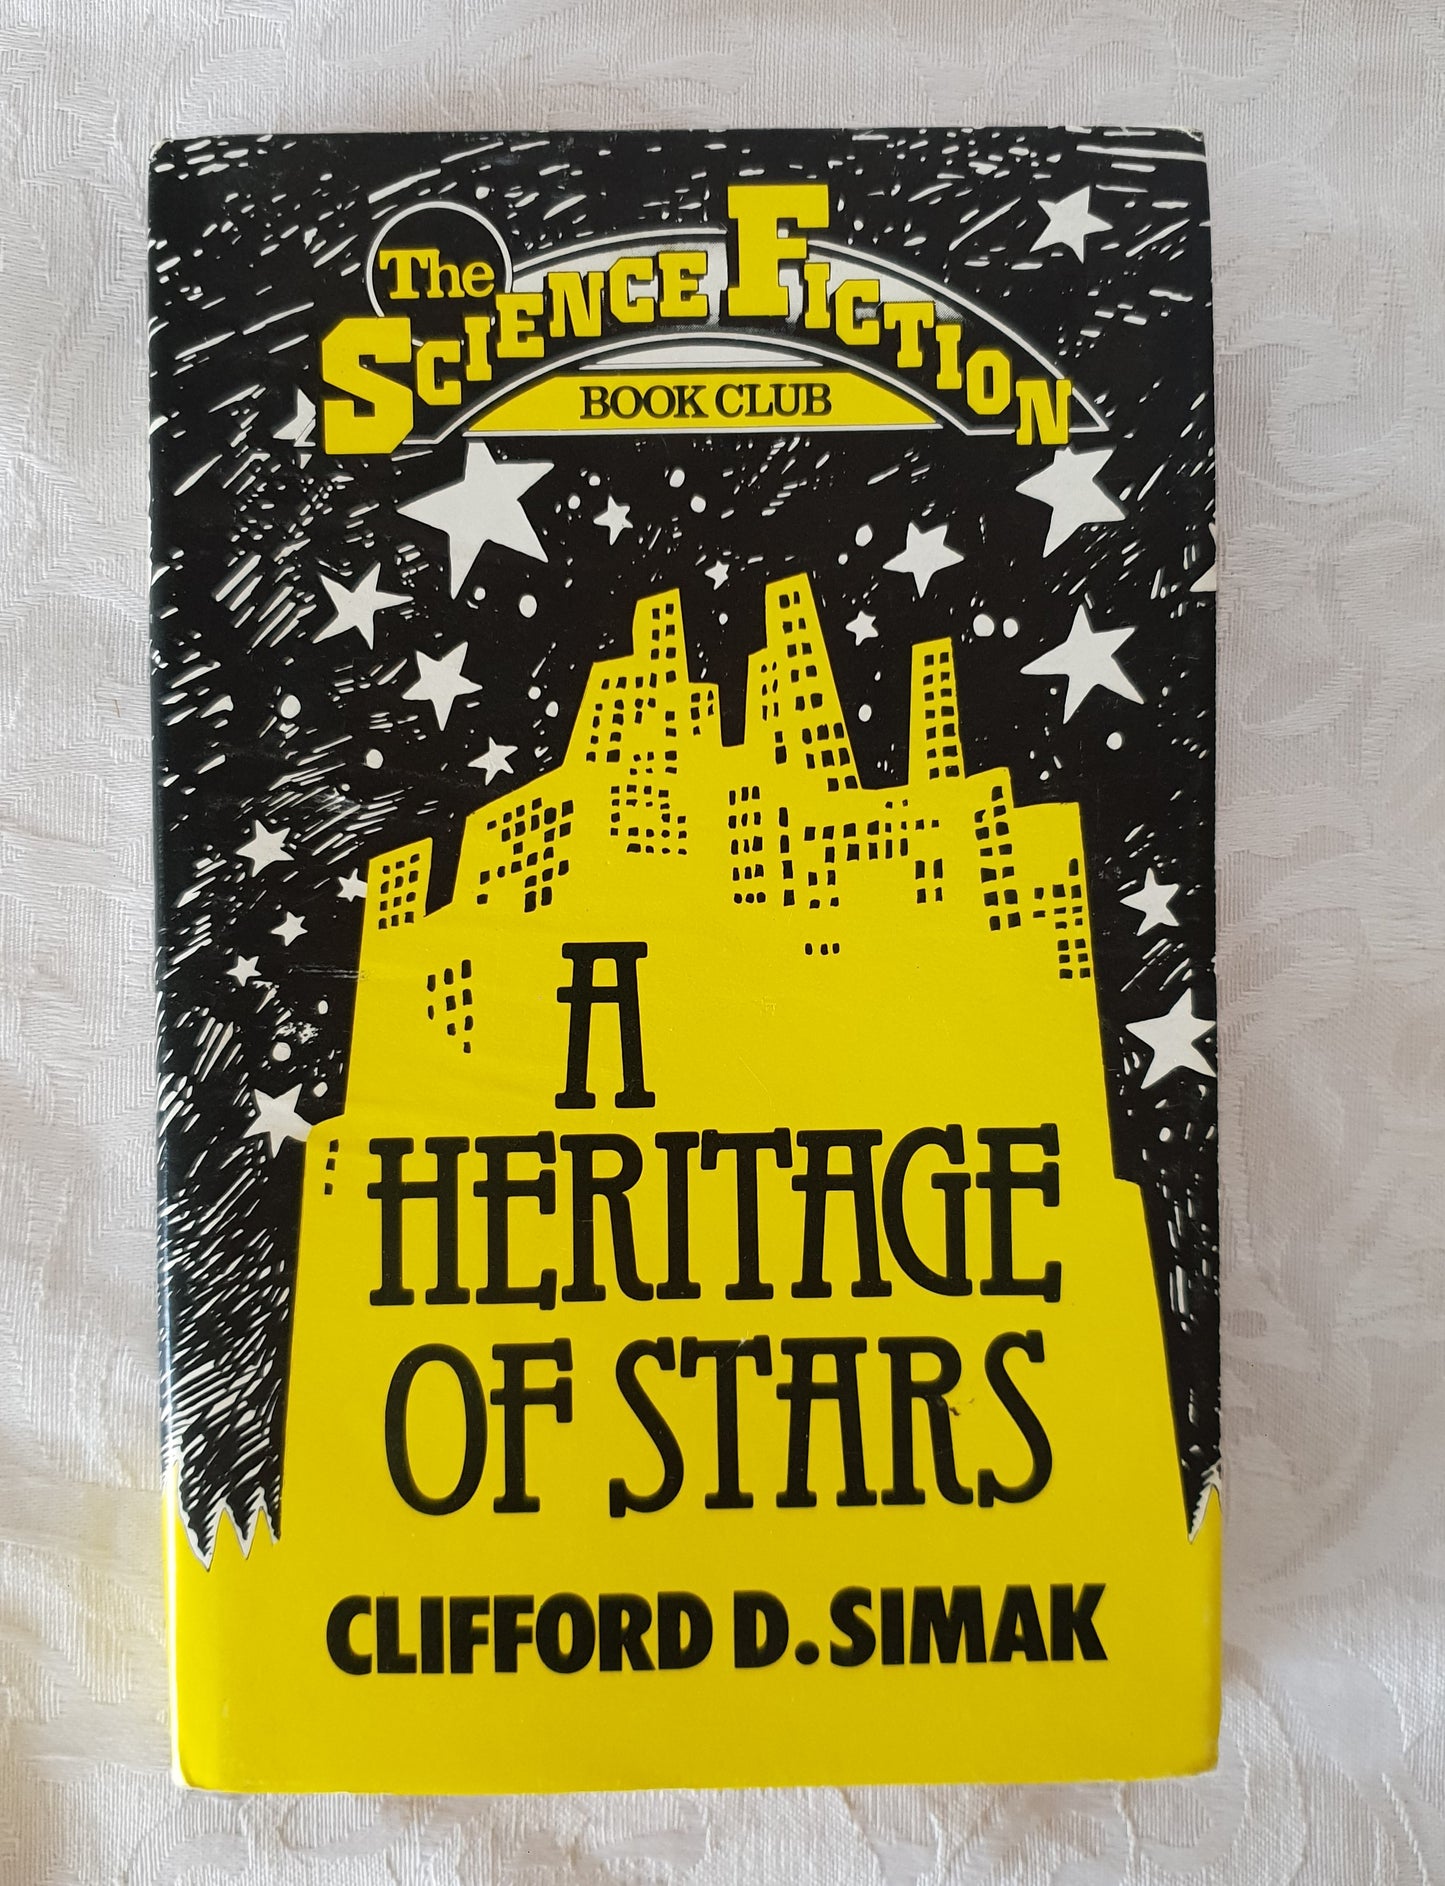 A Heritage of Stars by Clifford D. Simak